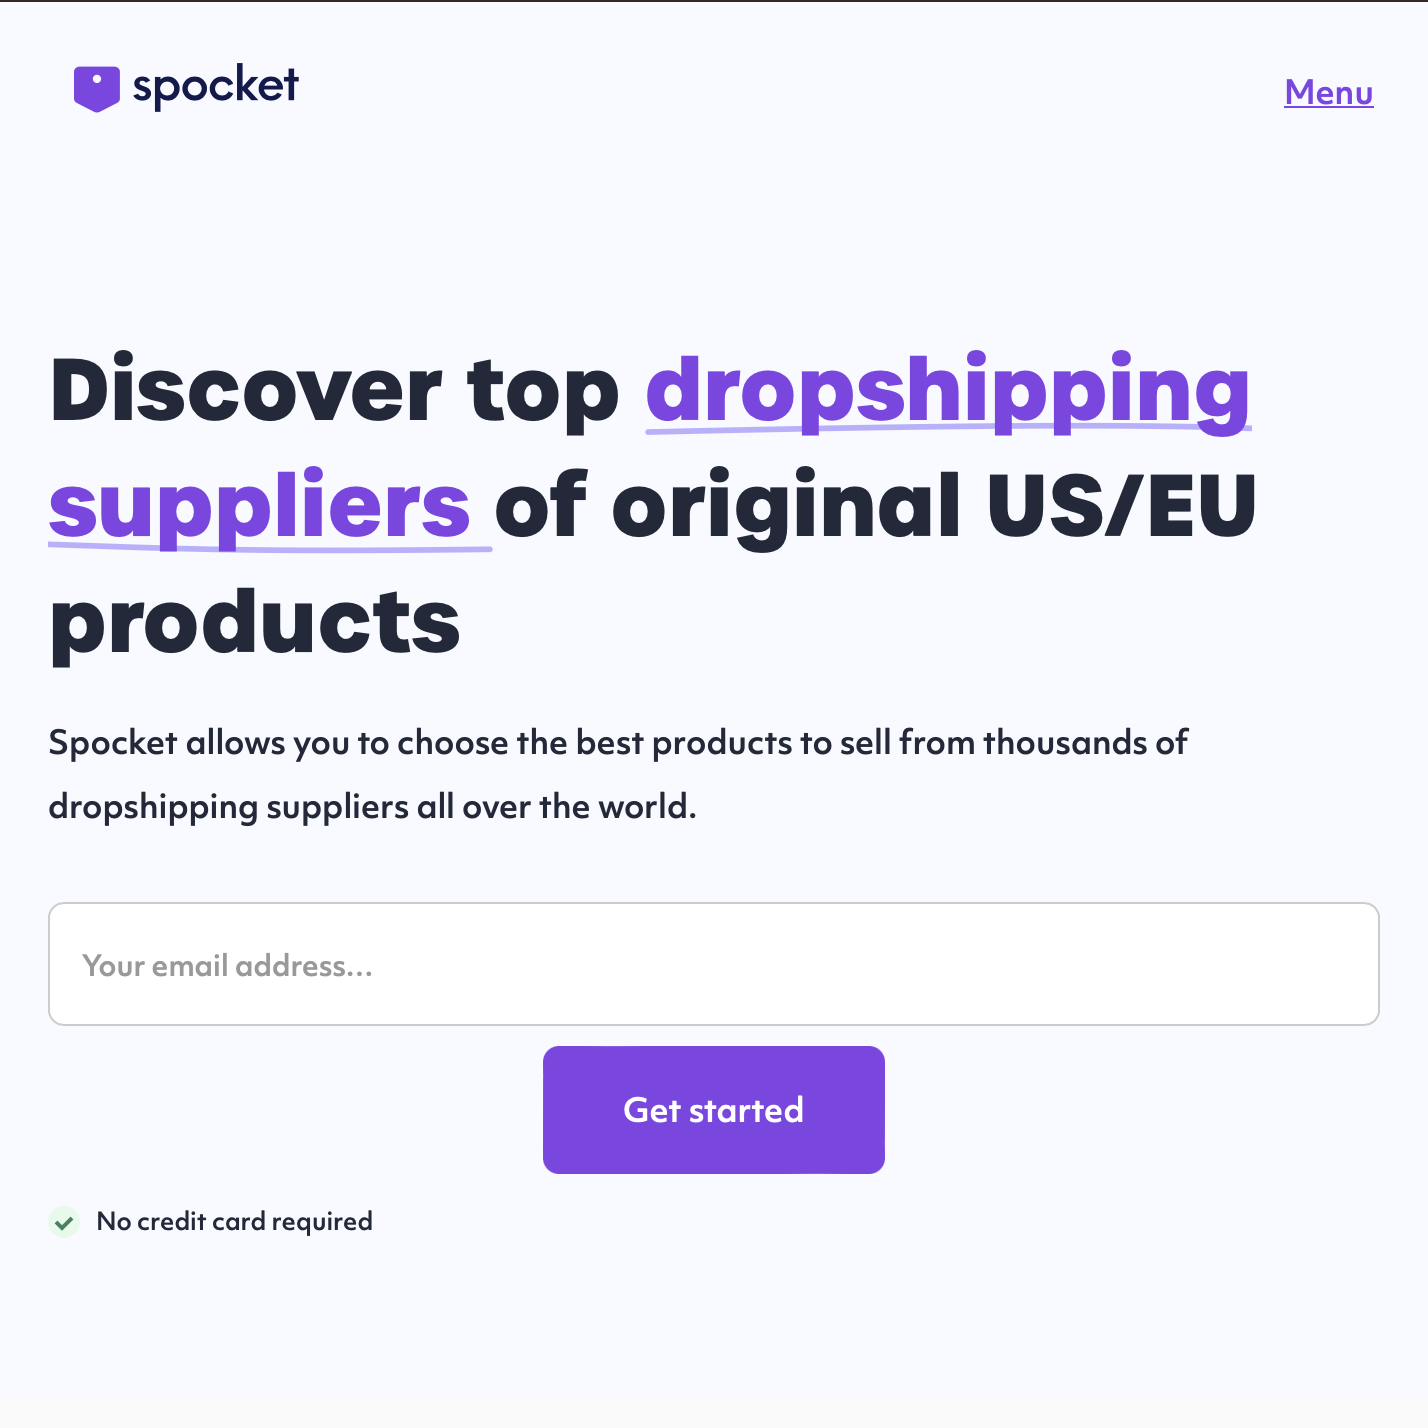 Spocket | Dropshipping suppliers in India